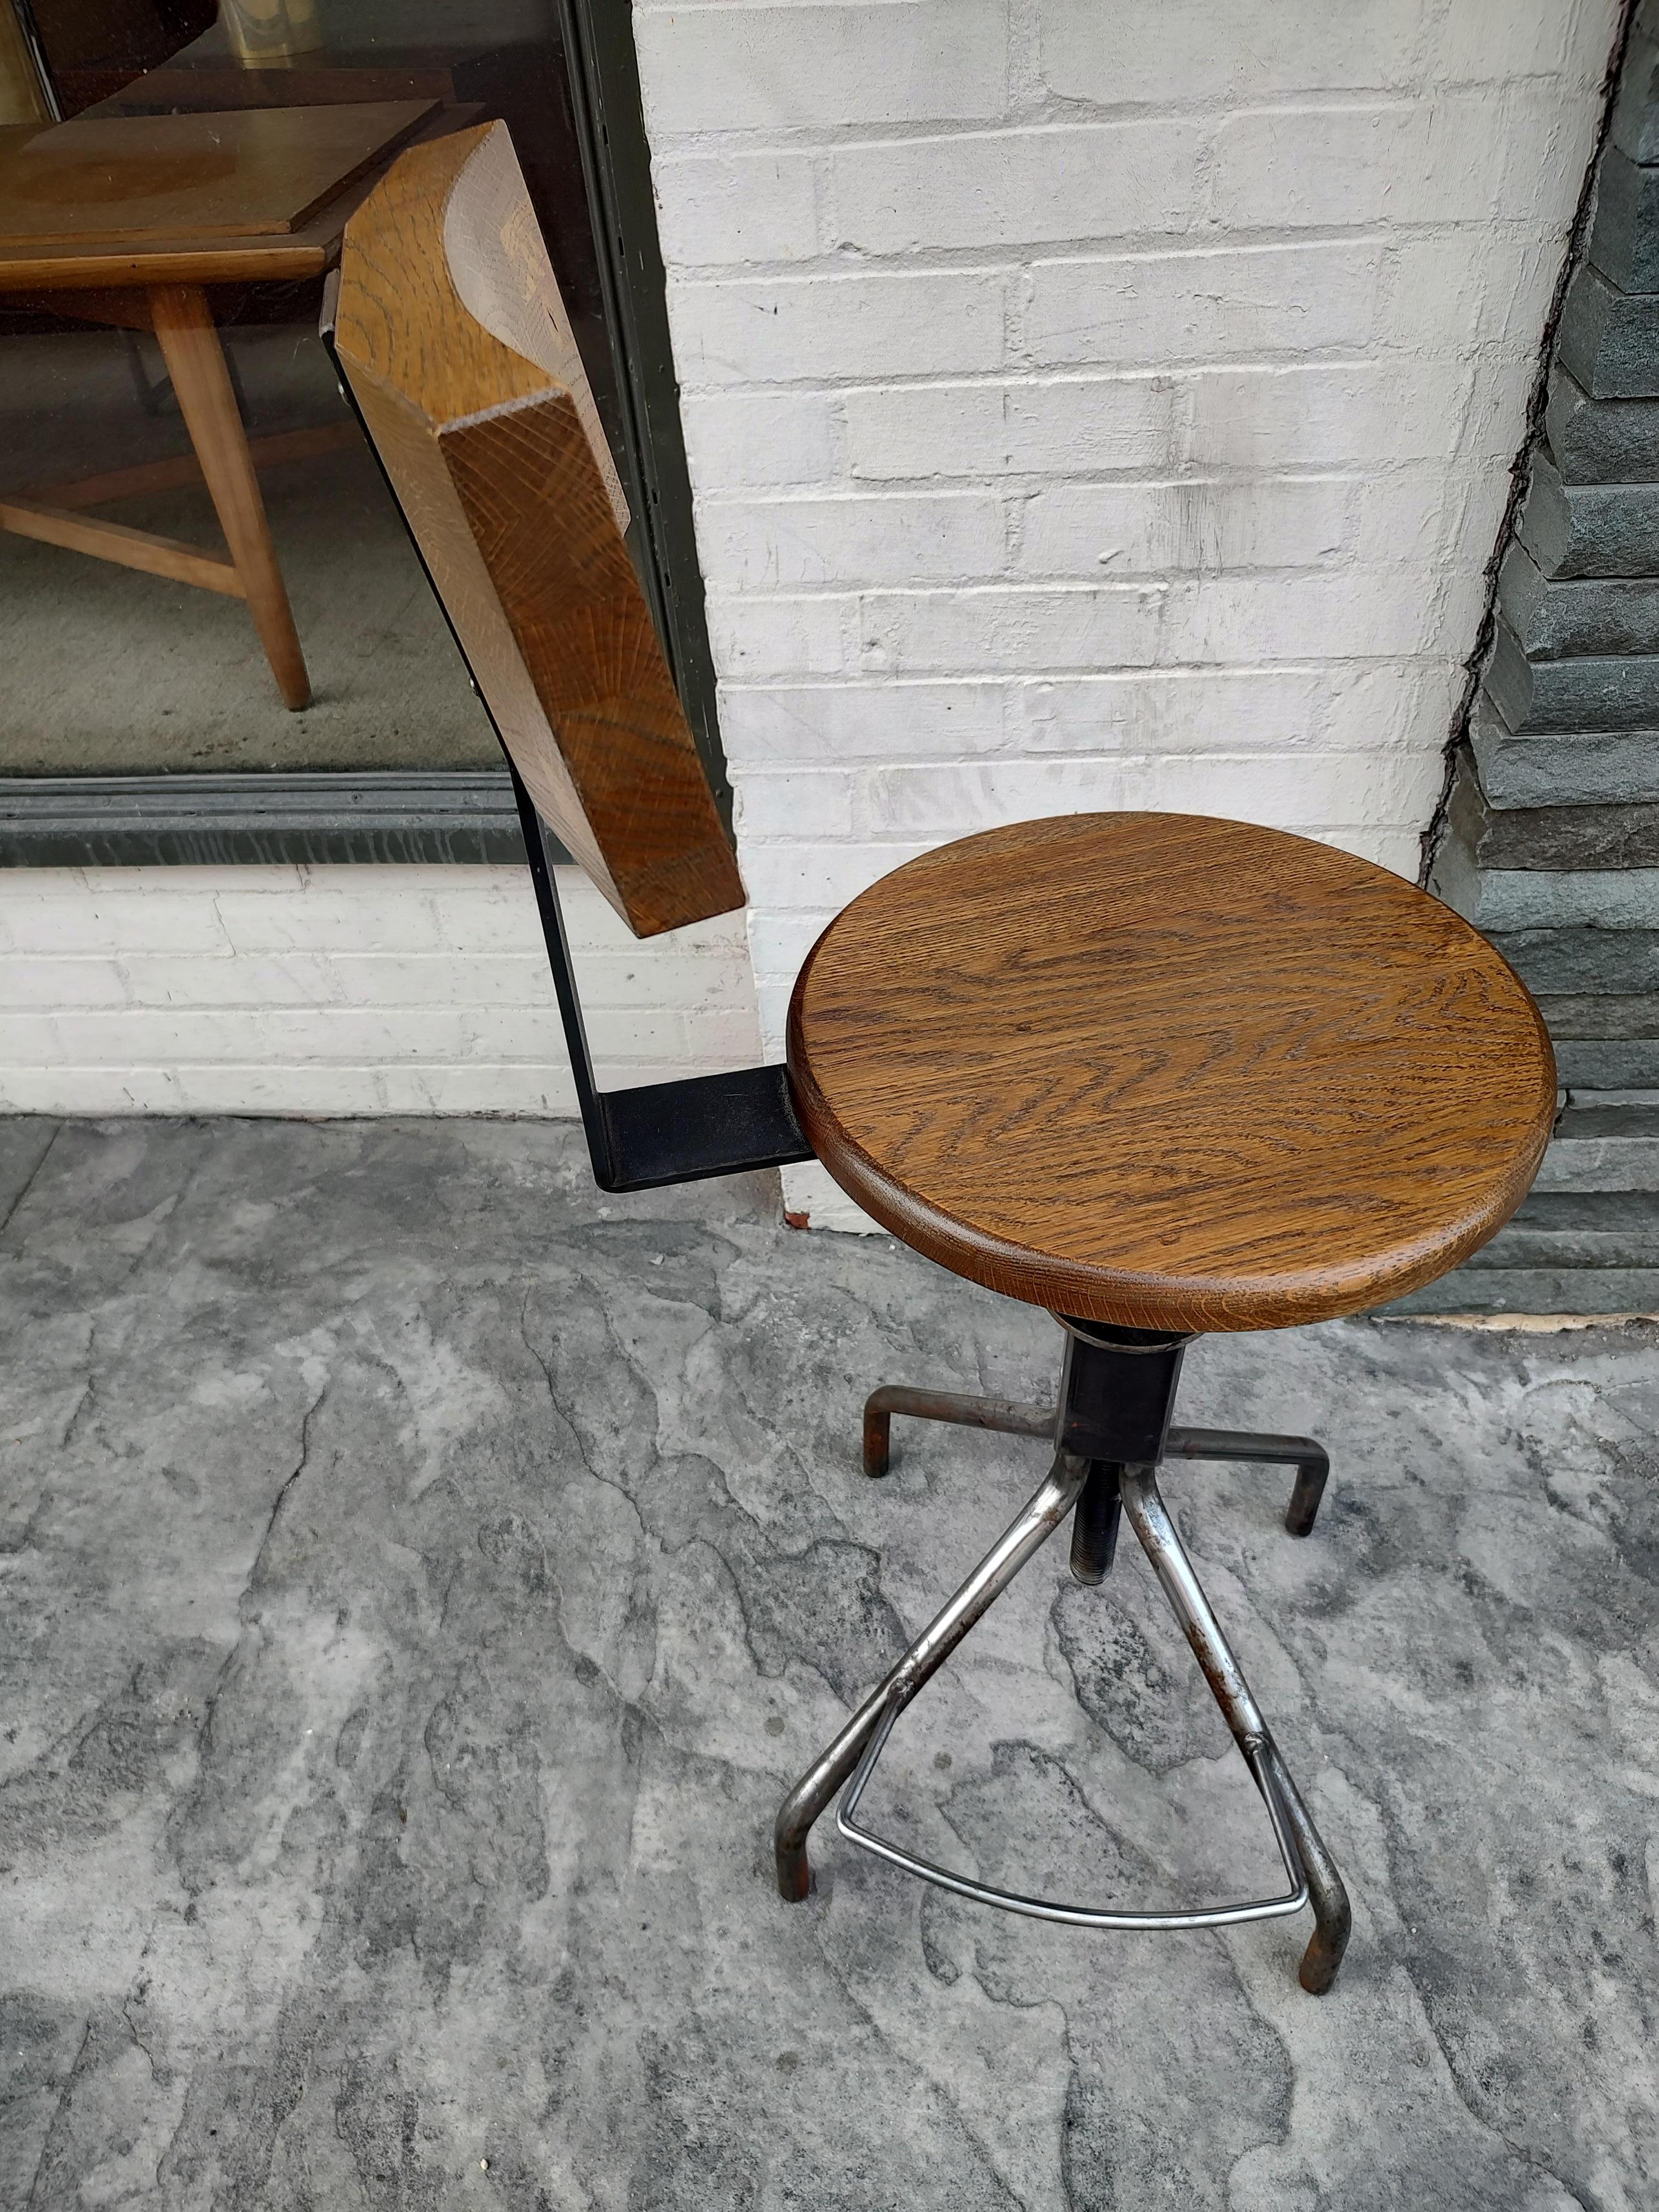 Fabulous adjustable custom made stool for a drafting table or work table. Adjusts in height from 25 to about 33. In excellent vintage condition with minimal wear. Oak seat and back which flexes. Chair can be parcel posted.